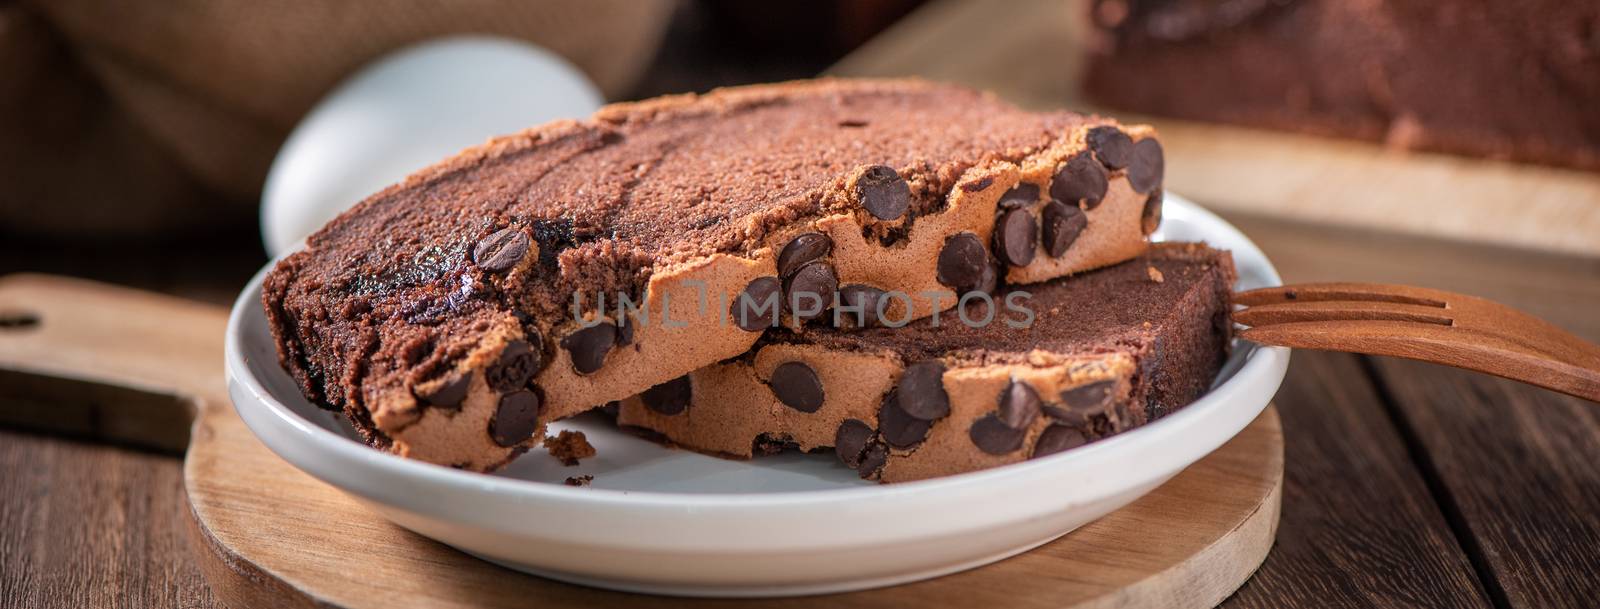 Chocolate flavor Taiwanese traditional sponge cake (Taiwanese castella kasutera) on a wooden tray background table with ingredients, close up.